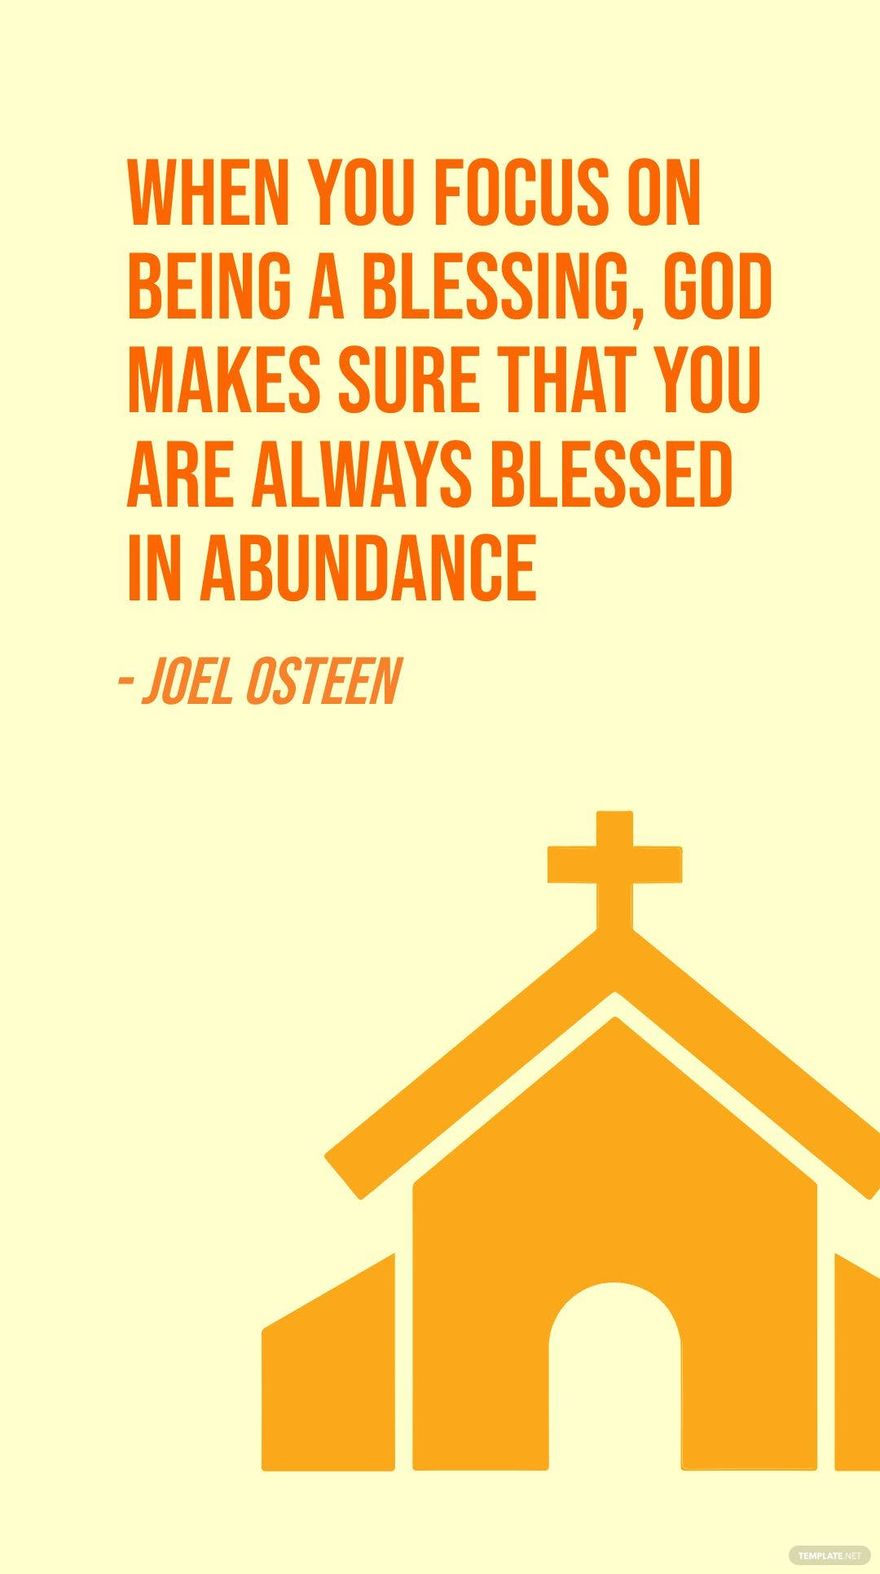 Free Joel Osteen - When you focus on being a blessing, God makes sure that you are always blessed in abundance in JPG